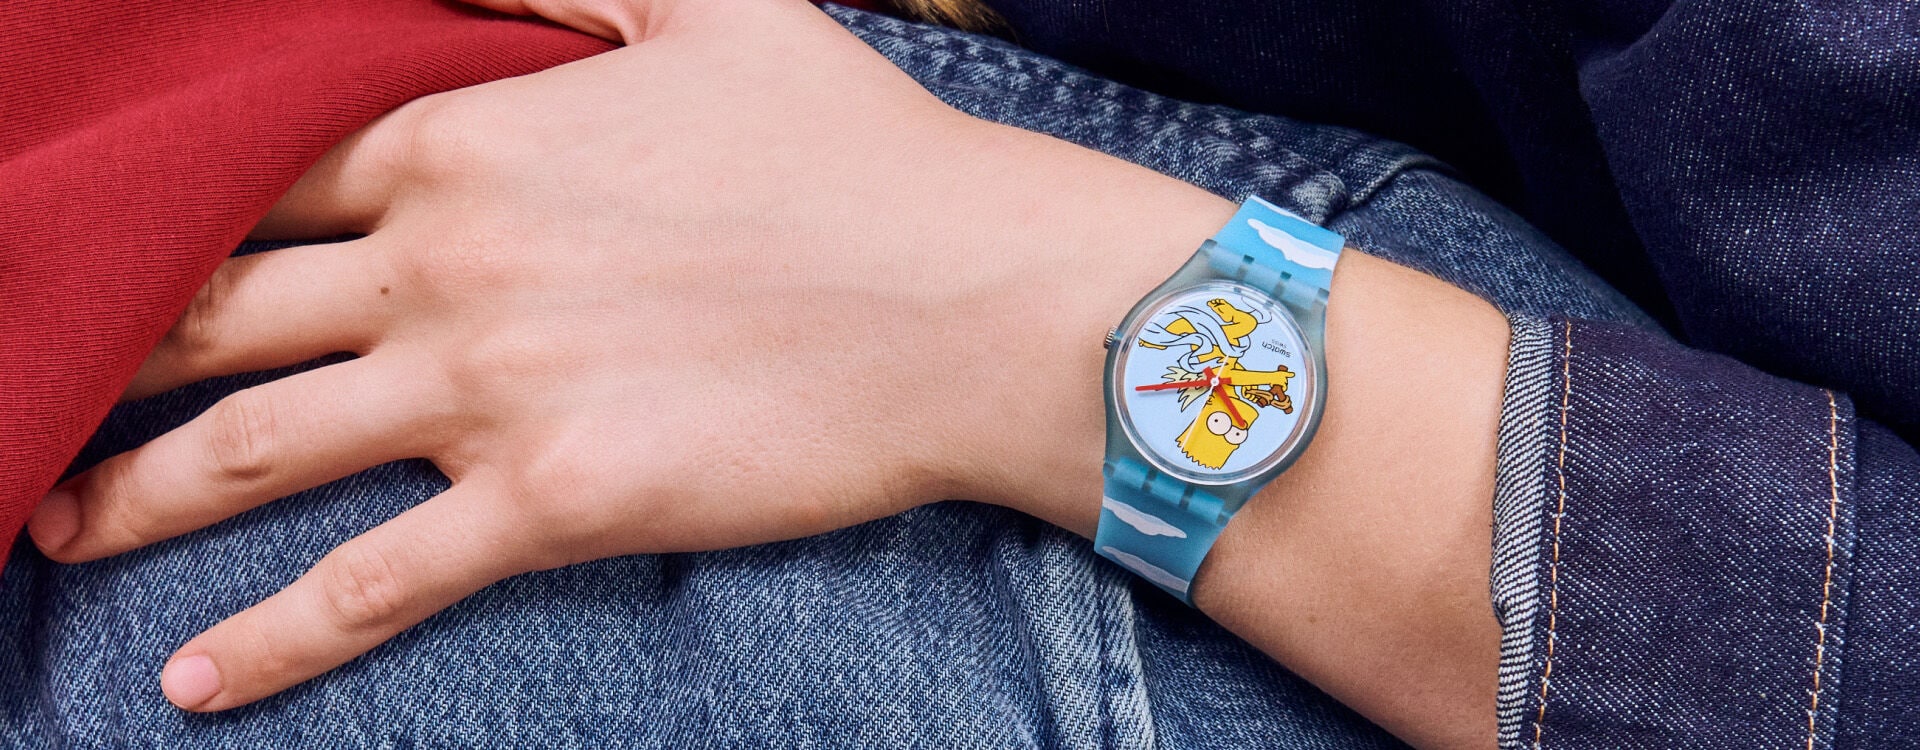 https://www.swatch.com/dw/image/v2/BDNV_PRD/on/demandware.static/-/Library-Sites-swarp-global/default/dw5c09624a/images/Swatch/collections/2024/simpsons/vday/plp/women_1920x750_d.jpg